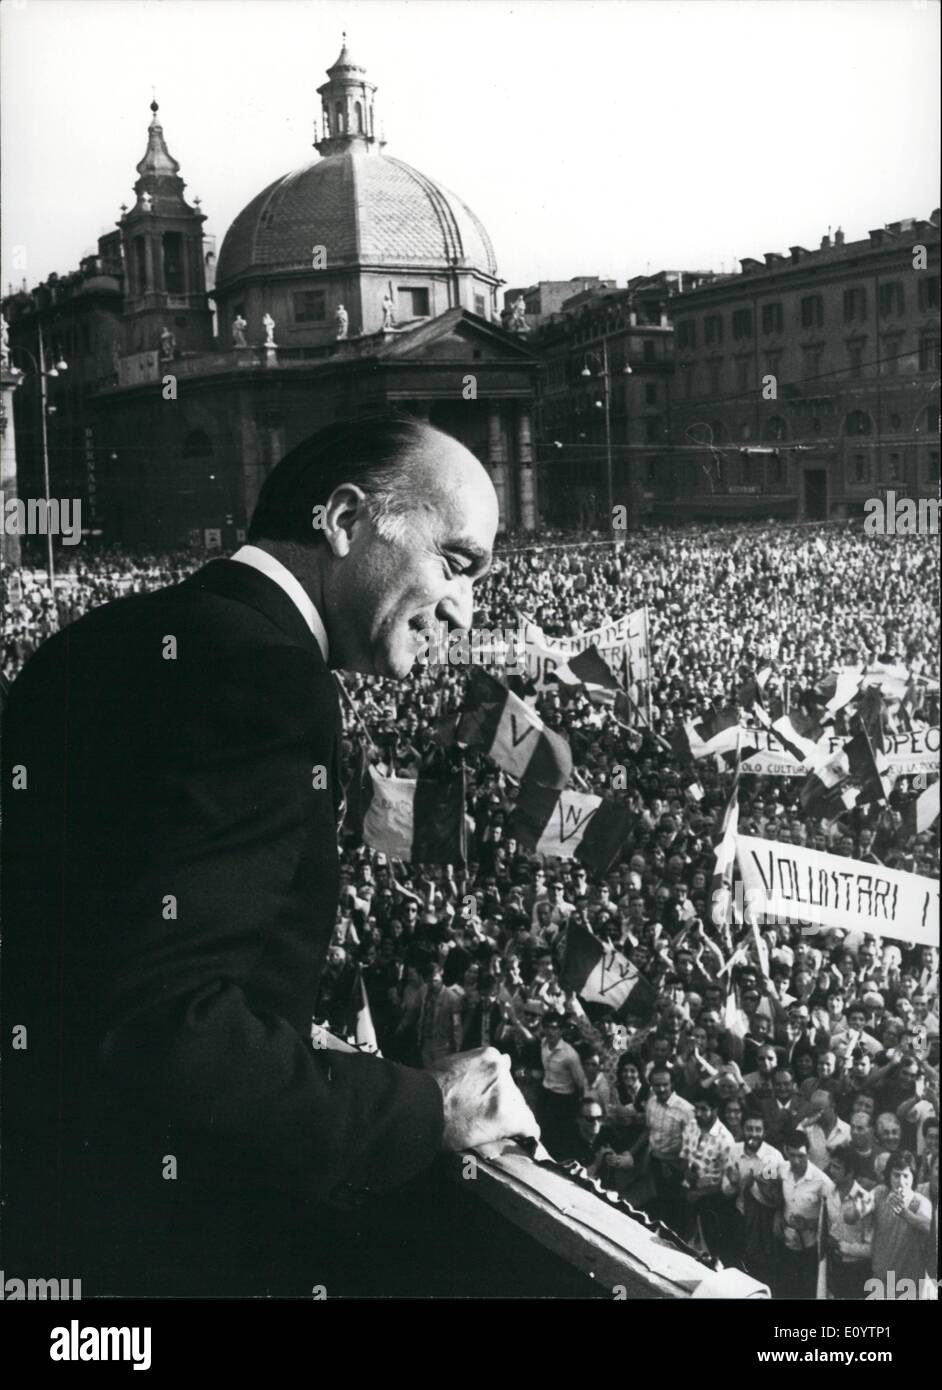 Jun. 06, 1971 - The Political party Movimento Sociale Italiano (MSI) better known at the foreign as the neofascist party, celebrated the increase of the votes had on the partial election on the past Sunday 13th of June, with a great assembly an the Piazza del Popolo where attended more than 100,000 people. The secretary of the party Giorgio Almirante spoke to the 'oceanic' (again ???) crowd. Photo shows Giorgio Almirante speaking to the people. Stock Photo